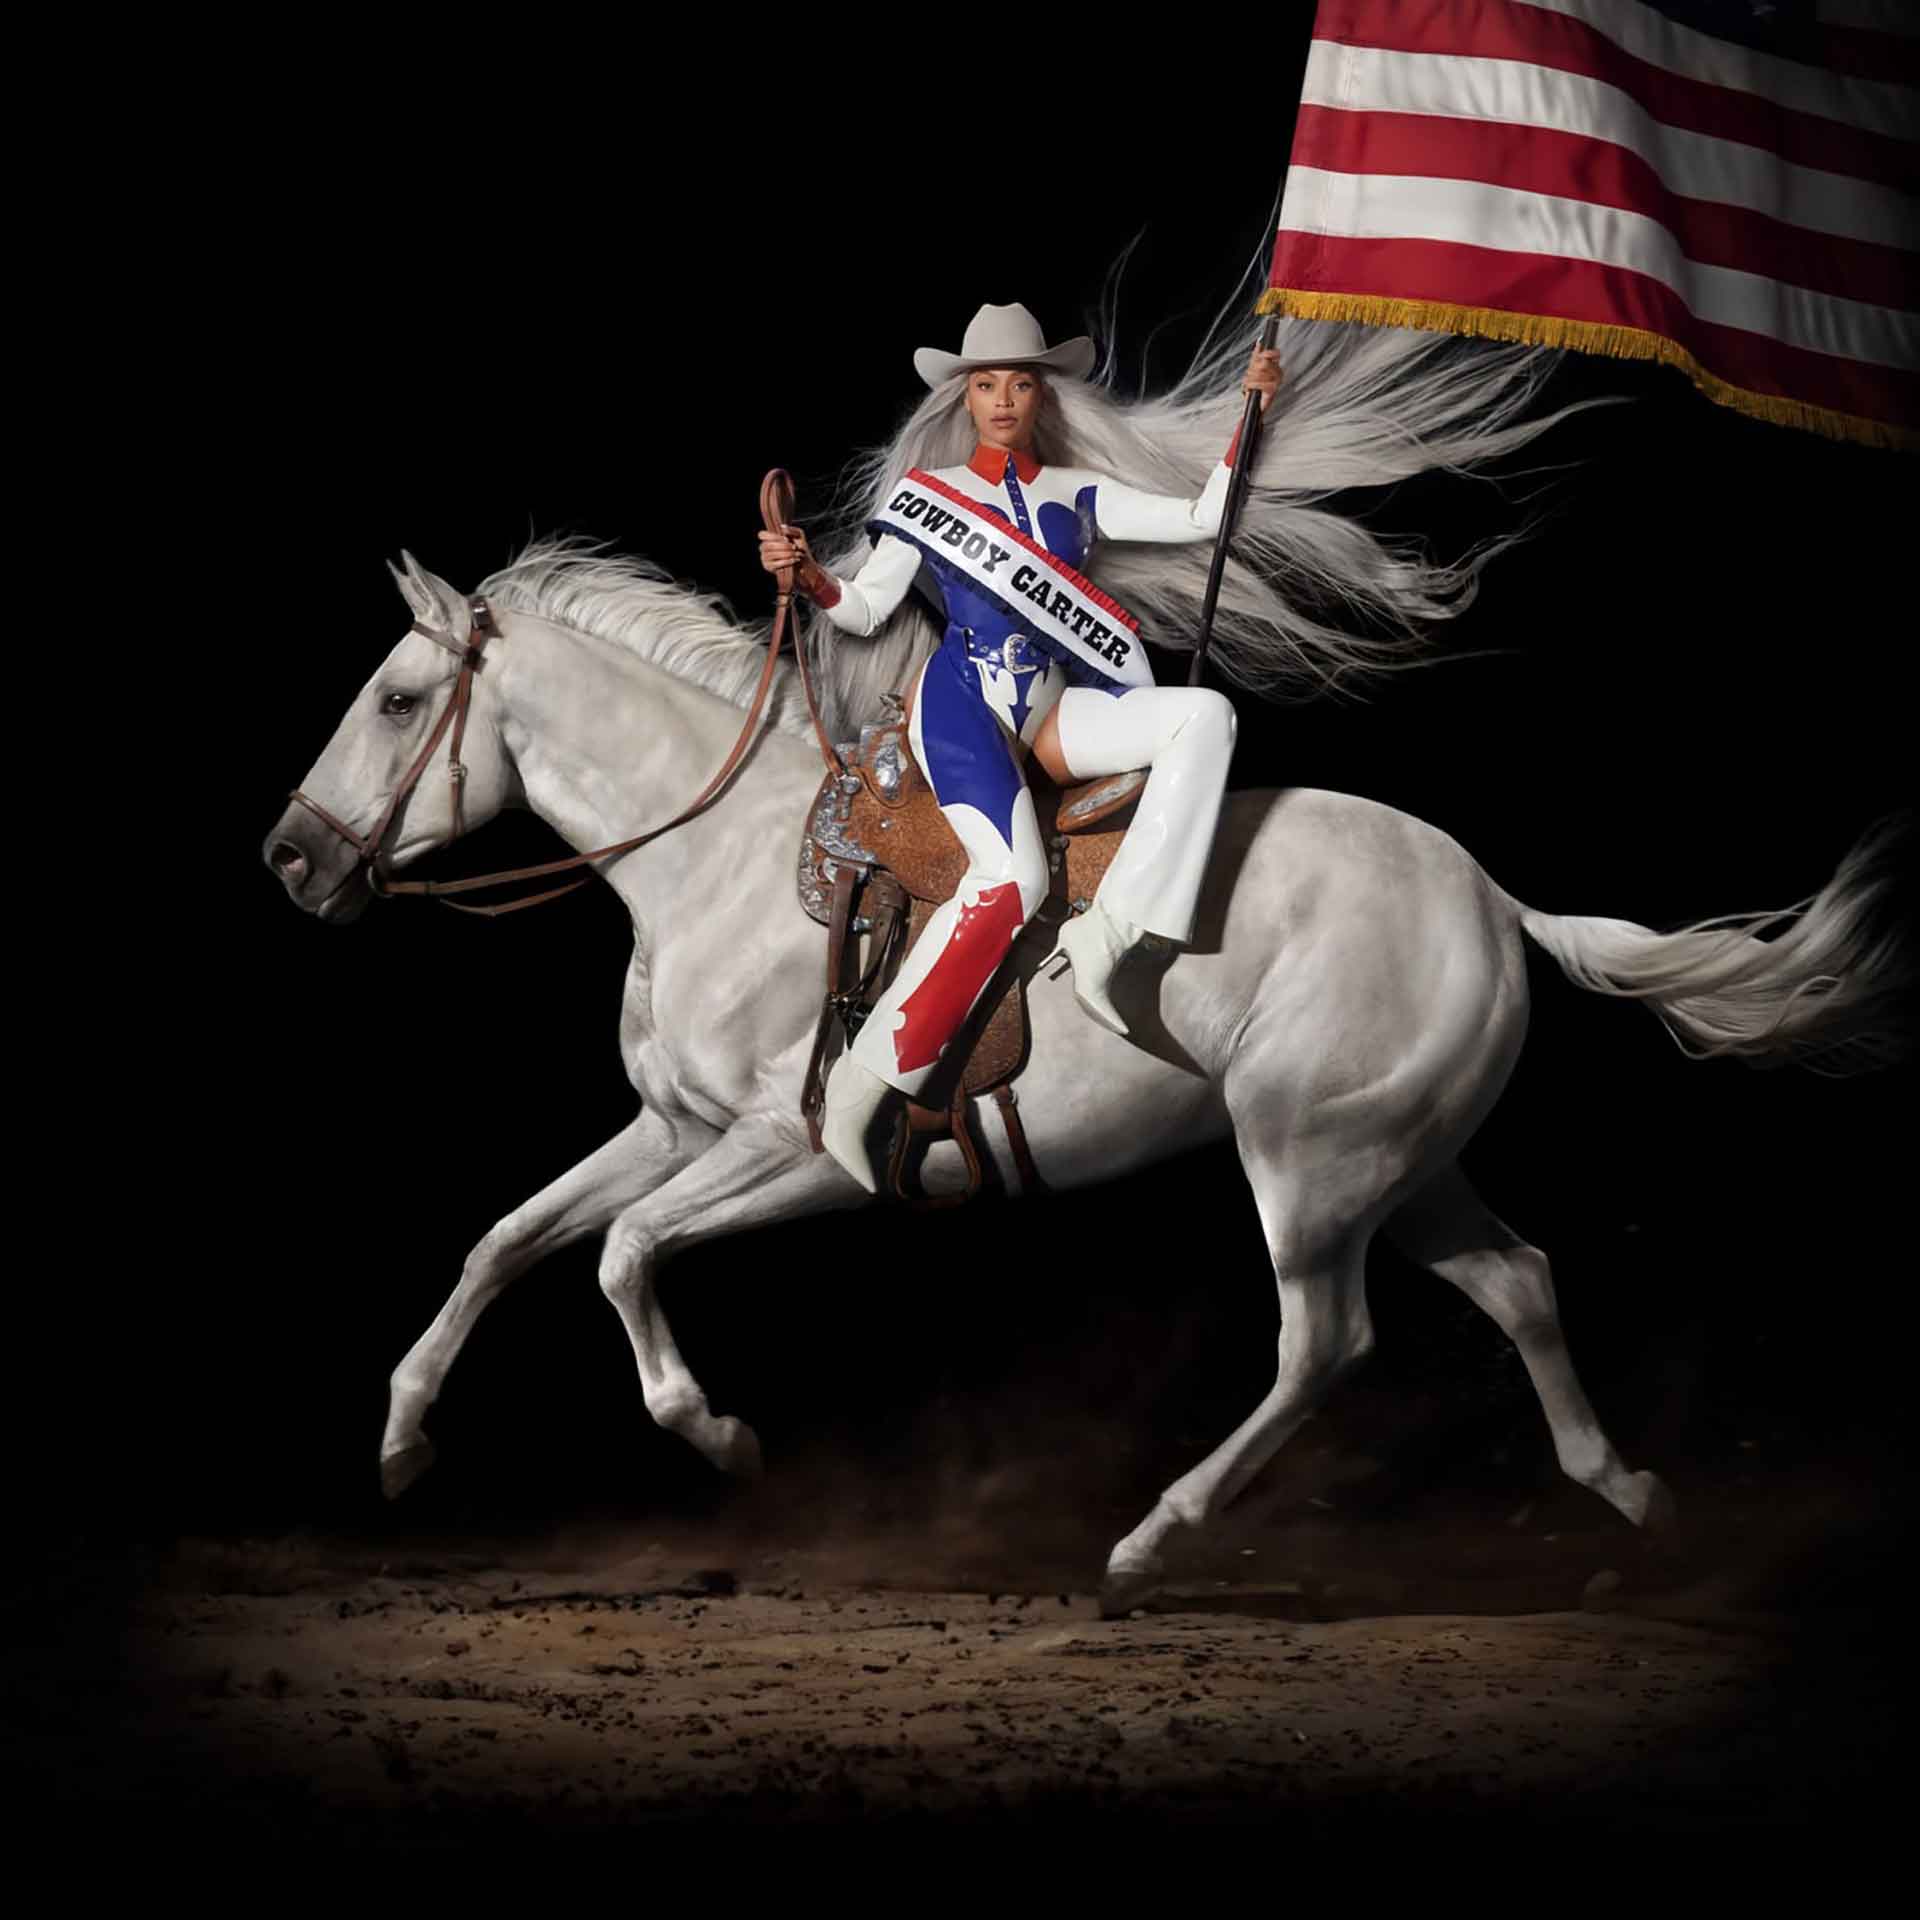 A woman in red white and blue clothes, with a sash reading 'Cowboy Carter,' sitting side saddle on a horse and holding an American flag